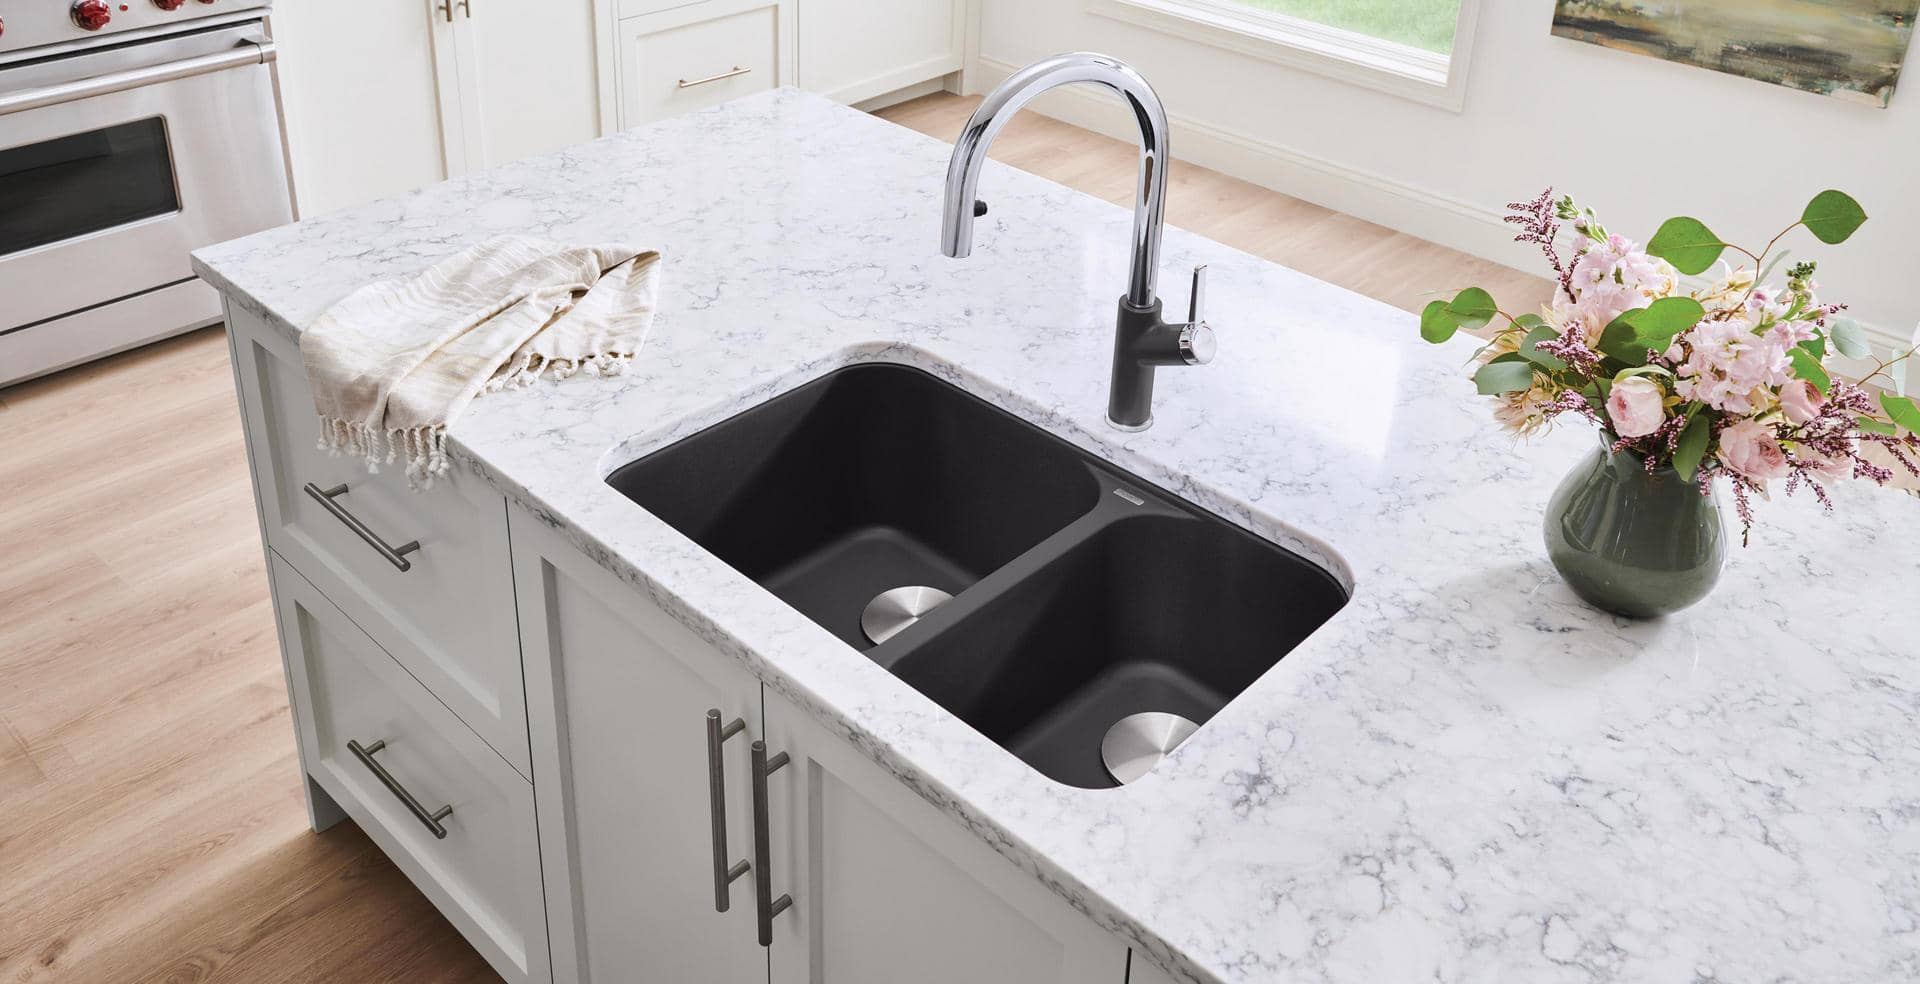 How To Attach An Undermount Sink To Granite